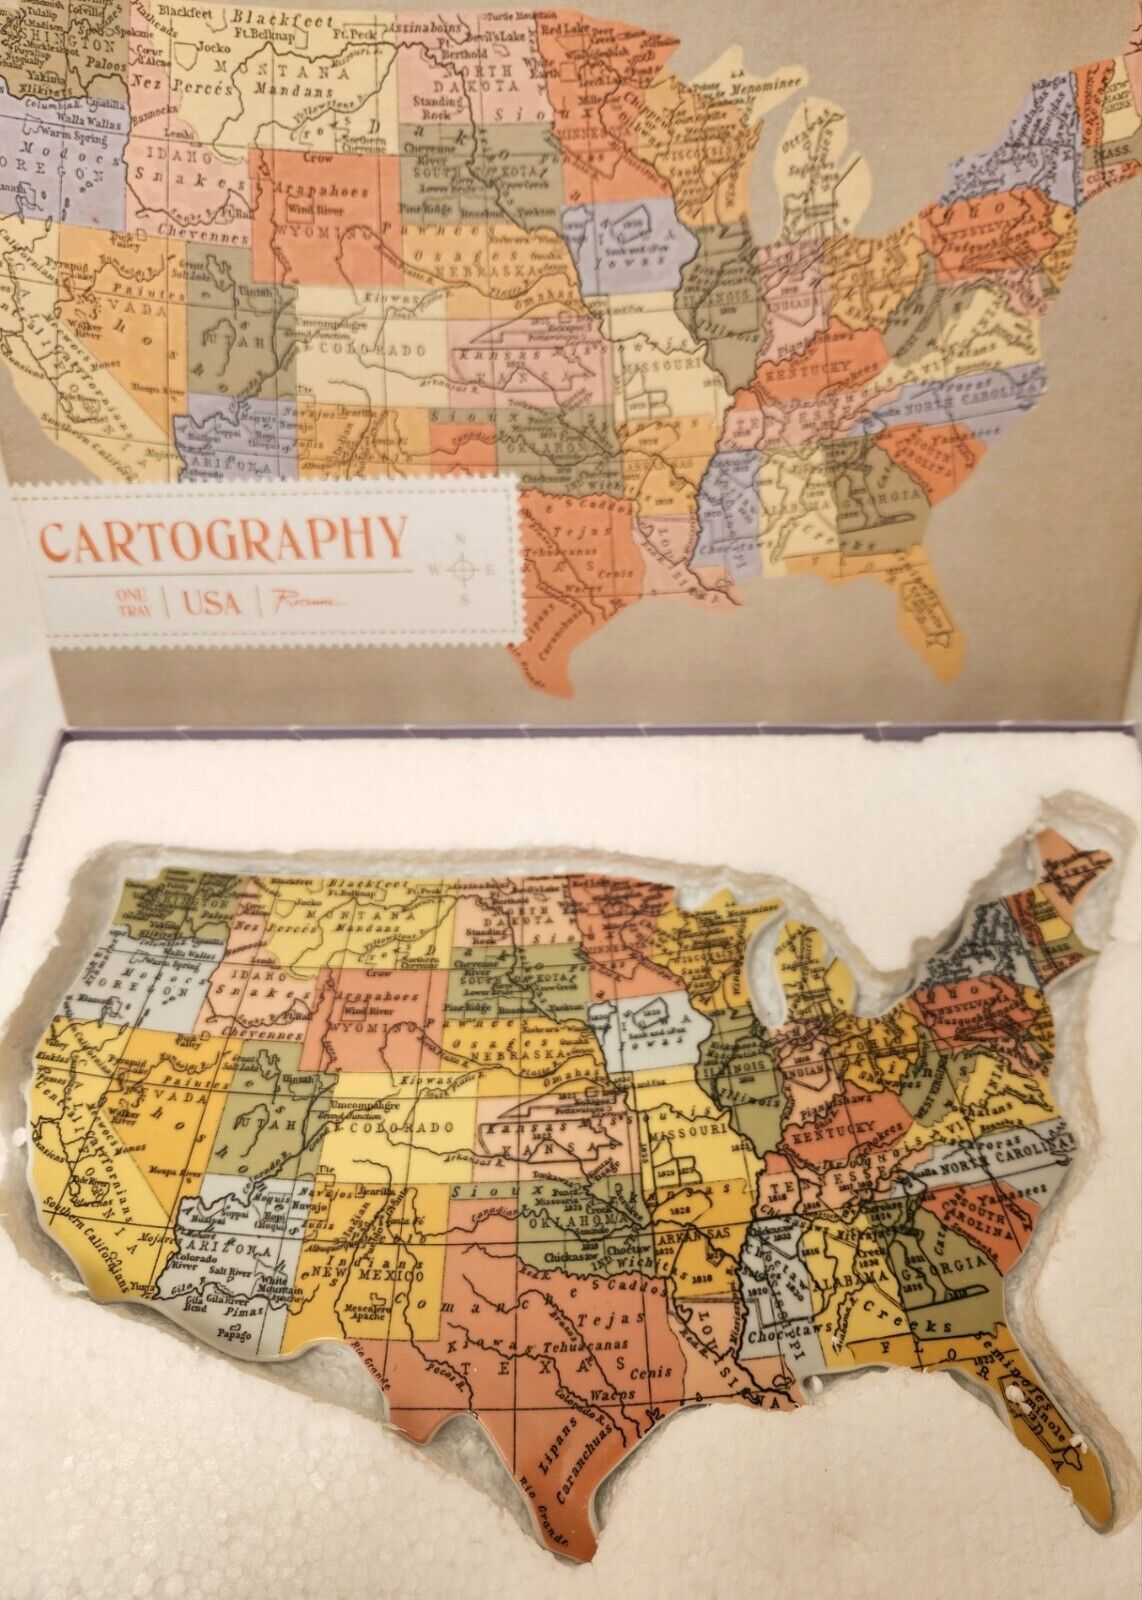 NEW Retired Rosanna CARTOGRAPHY USA Shaped Infinity Hors d'oeuvre Tray Plate